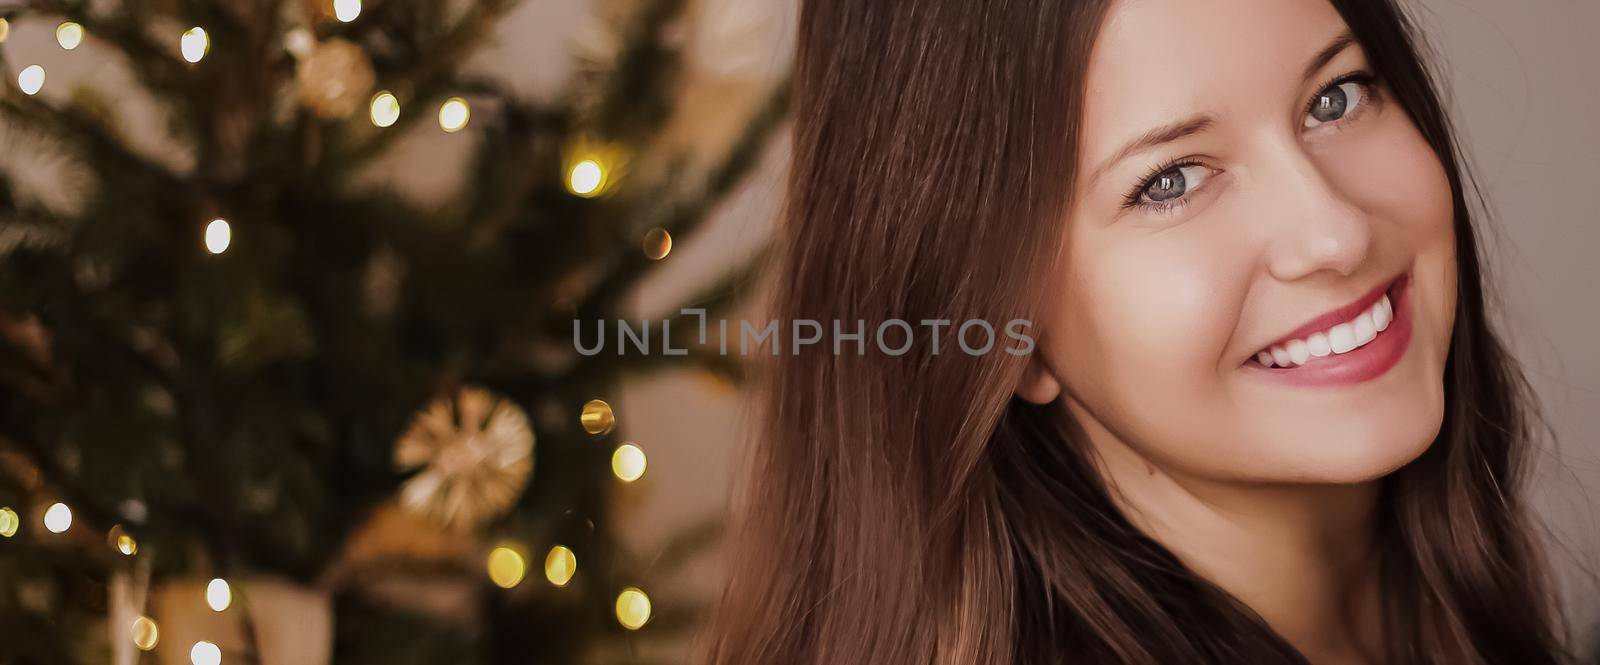 Christmas time and holiday mood concept. Happy smiling woman and decorated xmas tree lights on background by Anneleven